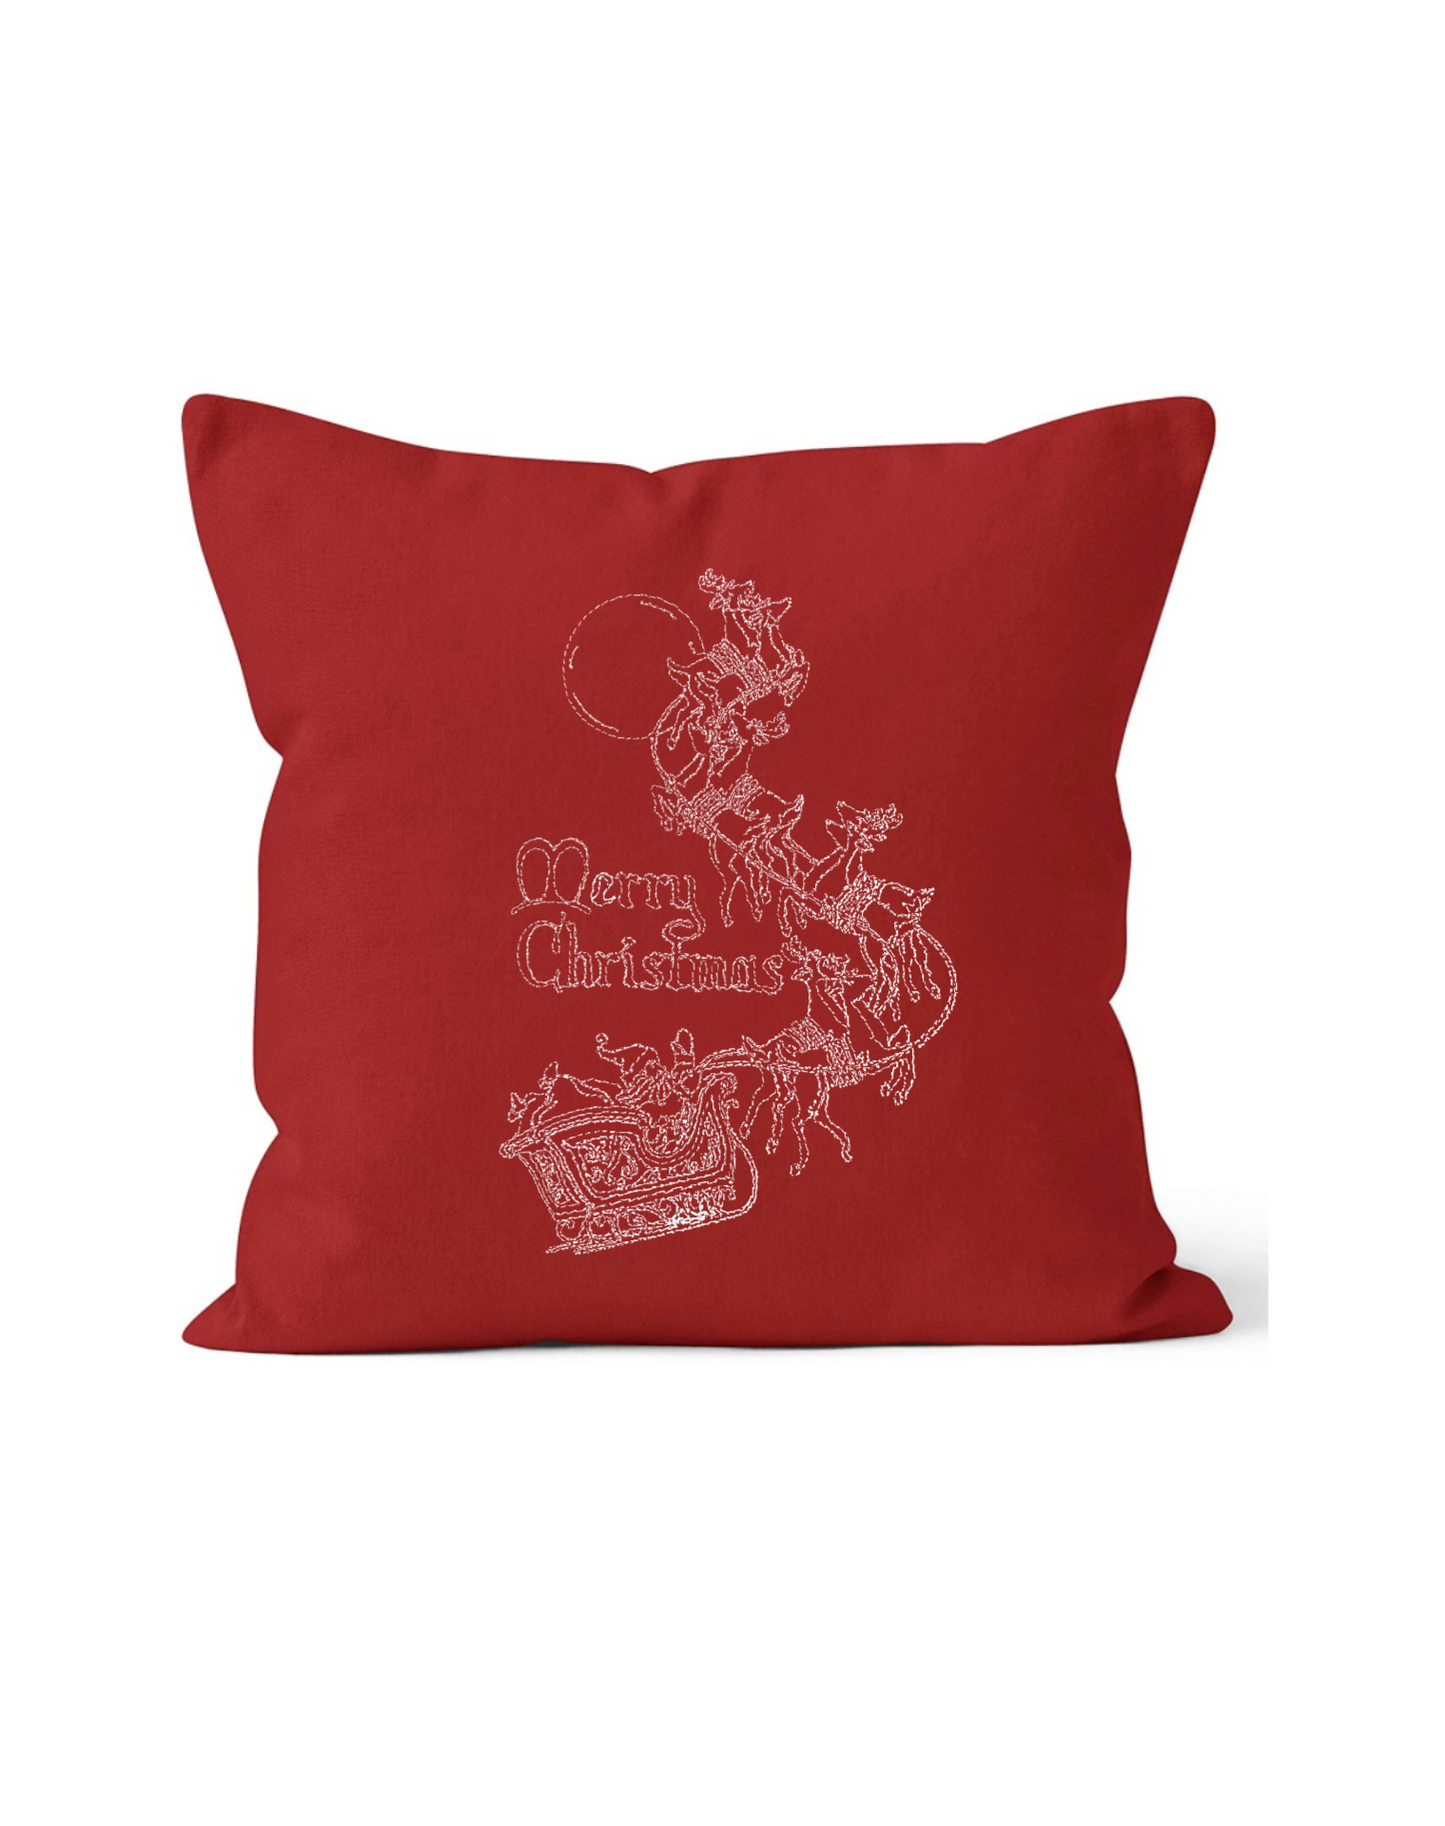 Santa’s Sleigh Ride Embroidered Throw Pillow Cover 18" x 18” Cotton Accent Pillow Cover Zip Closure.